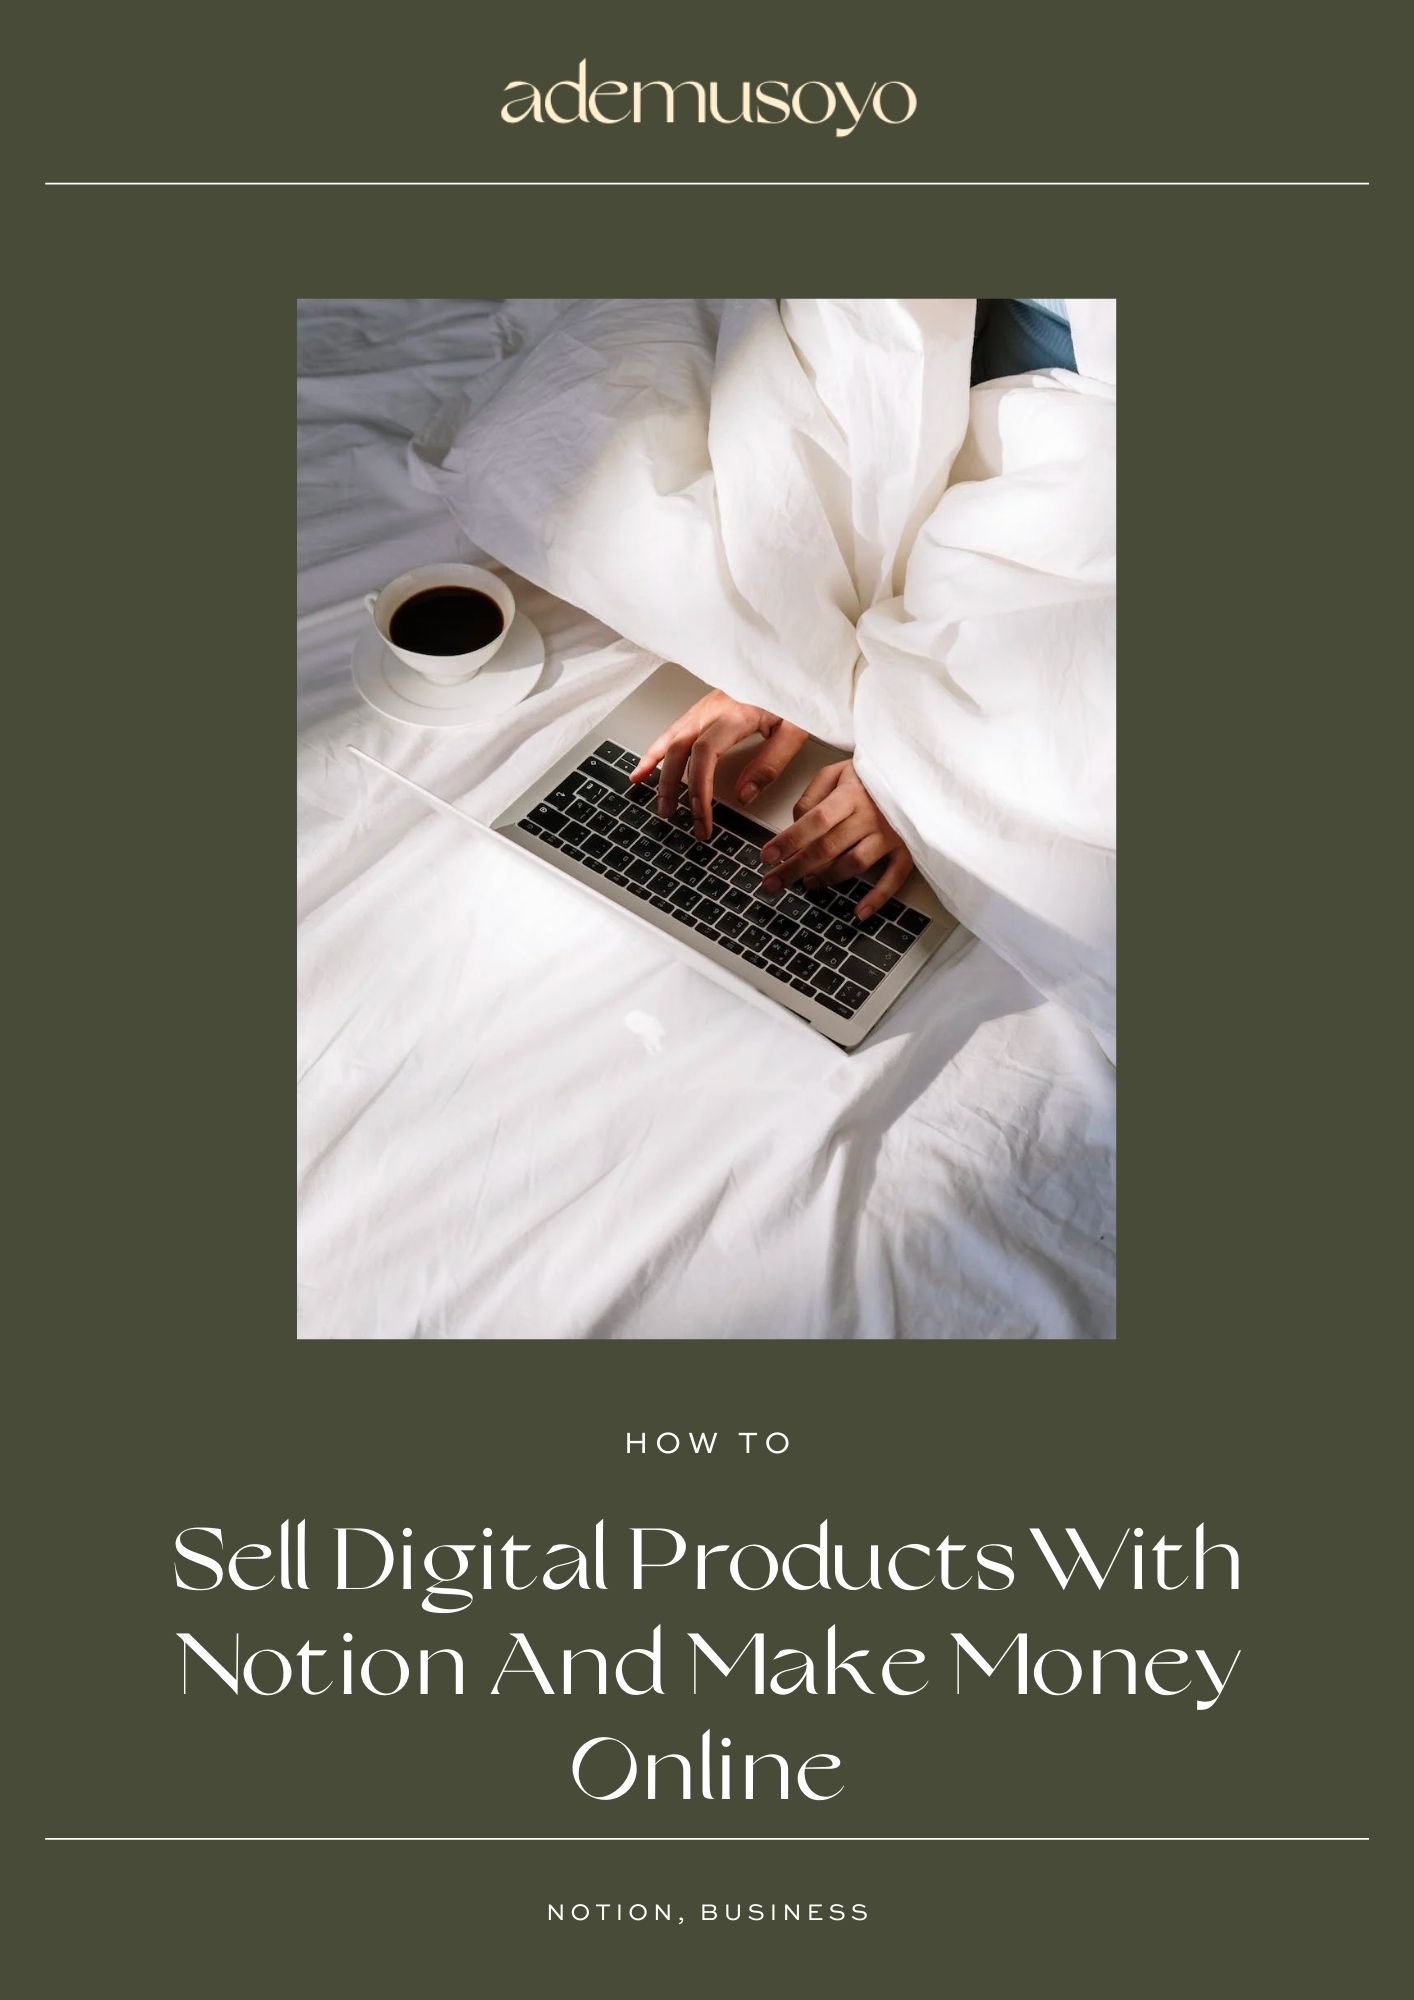 How To Sell Digital Products With Notion And Make Money Online